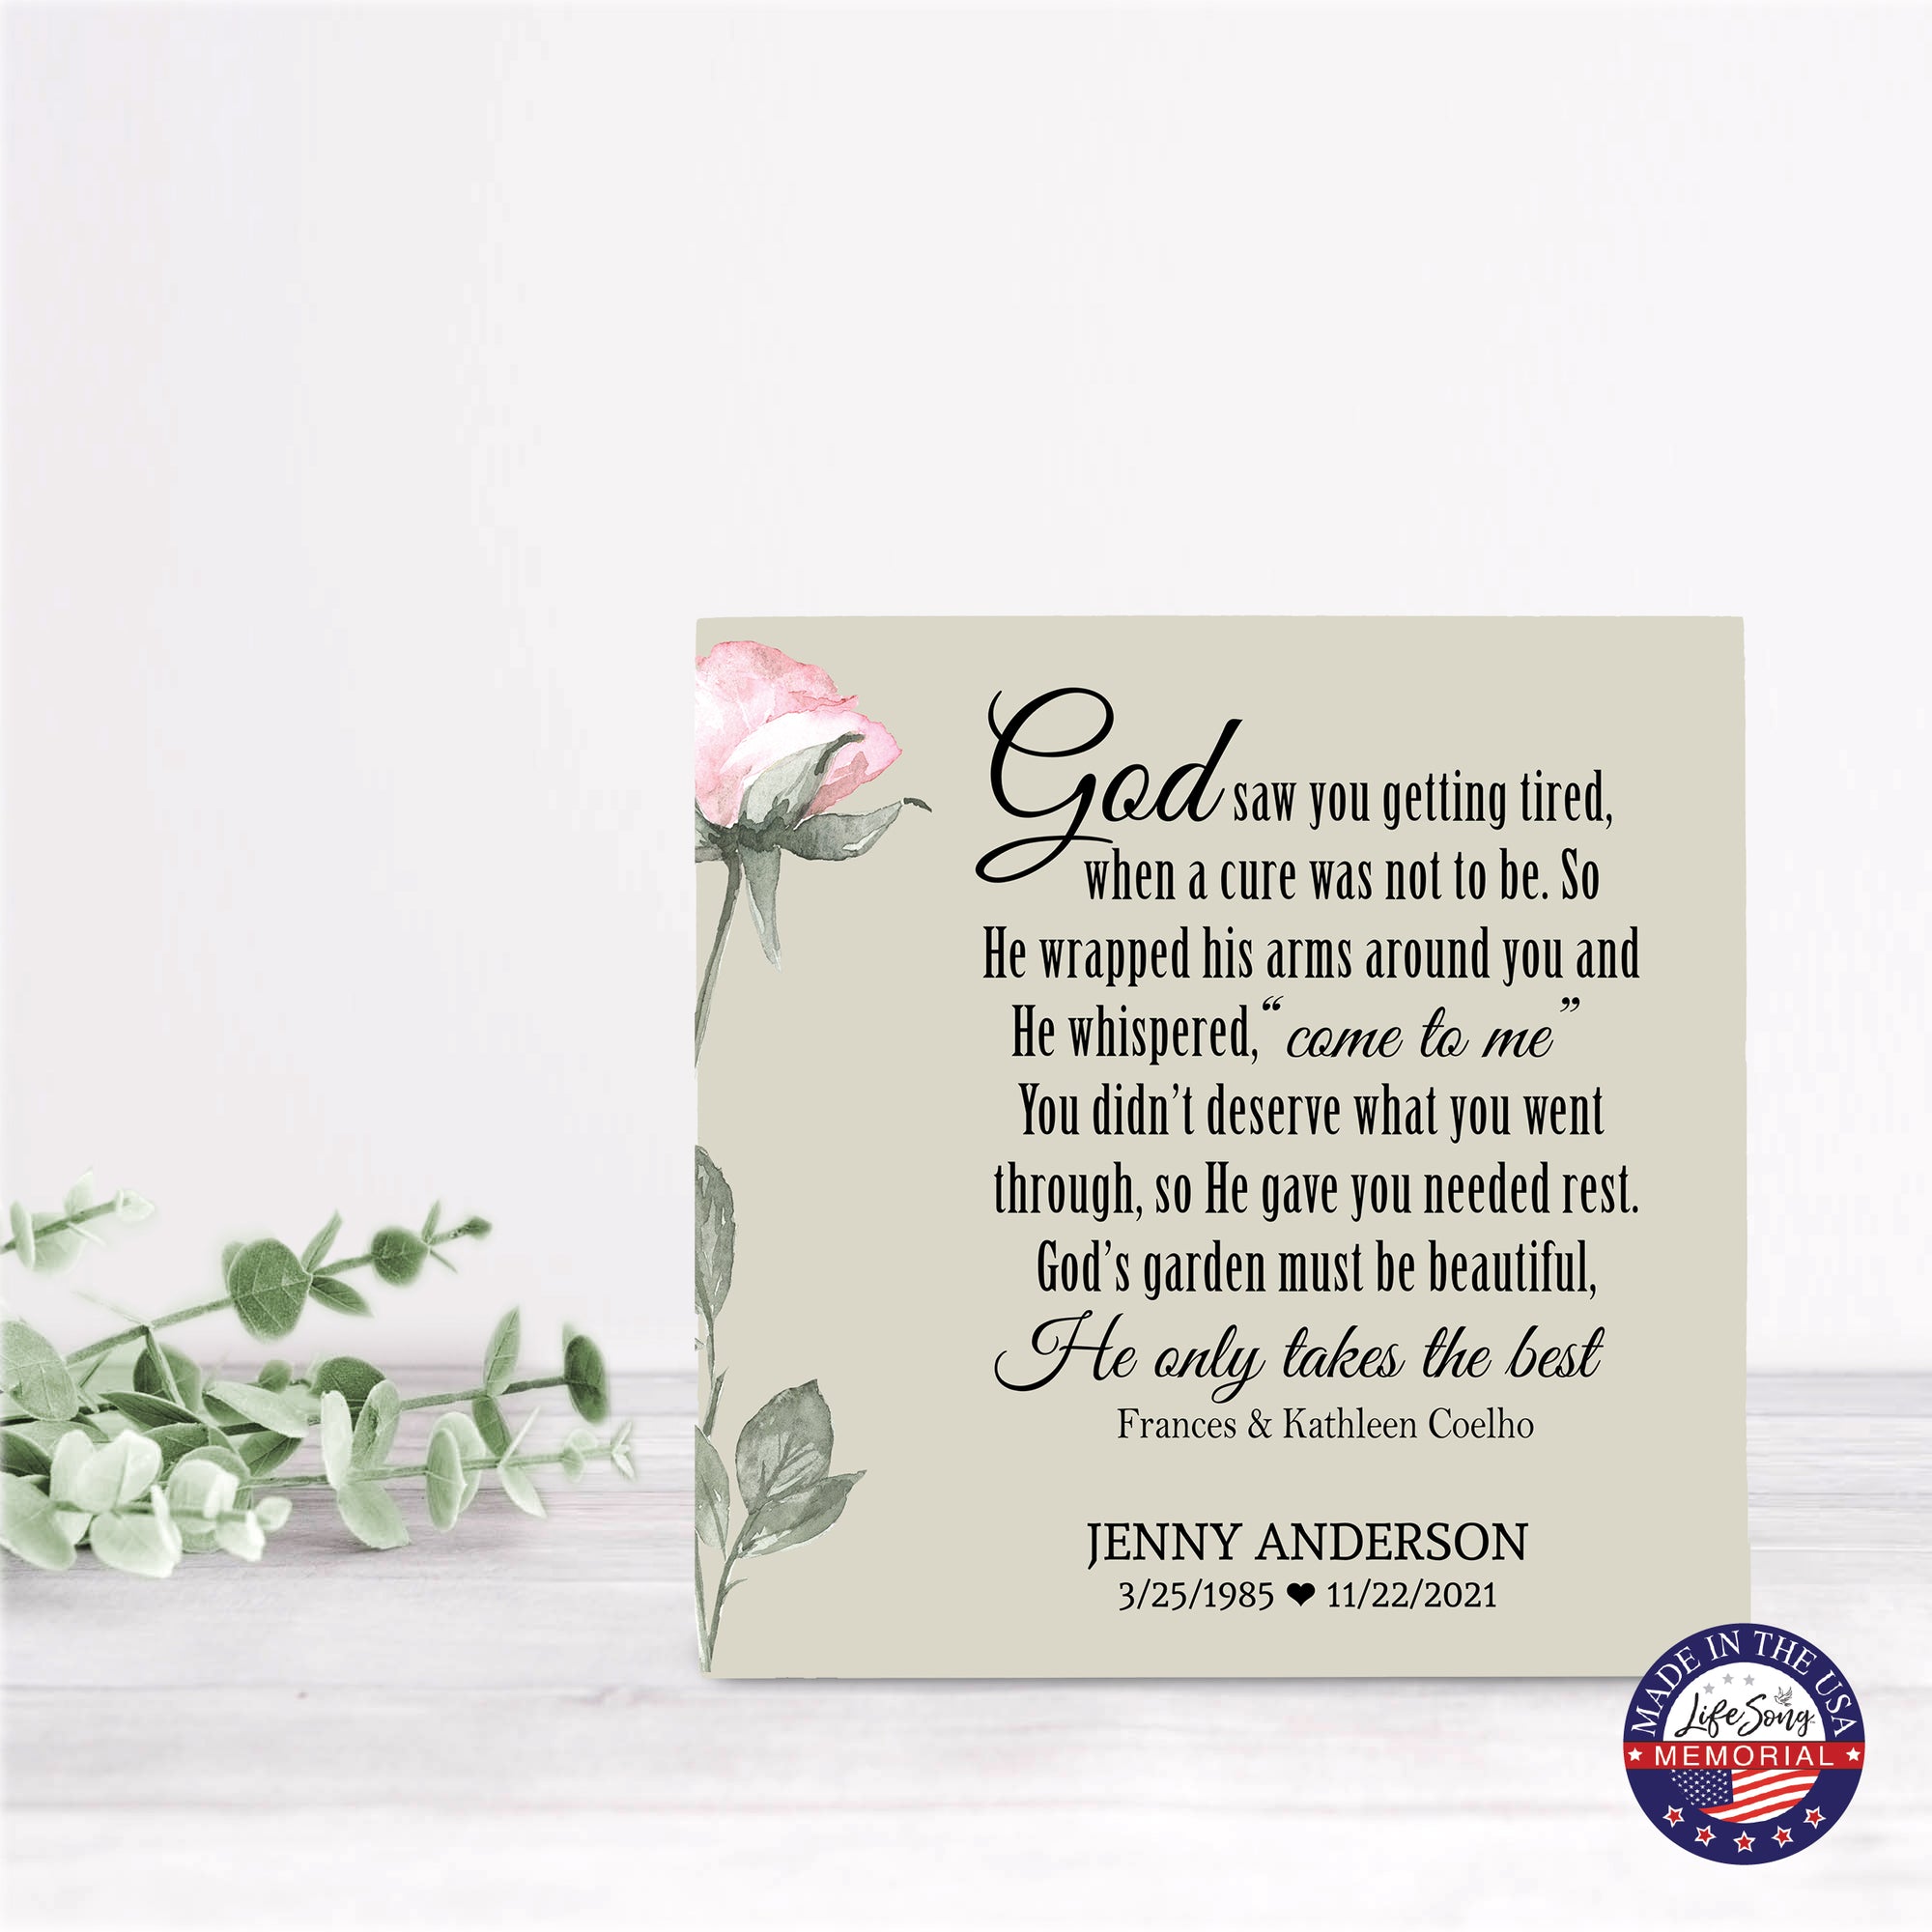 Timeless Human Memorial Shadow Box Urn With Inspirational Verse in Ivory - God Saw You